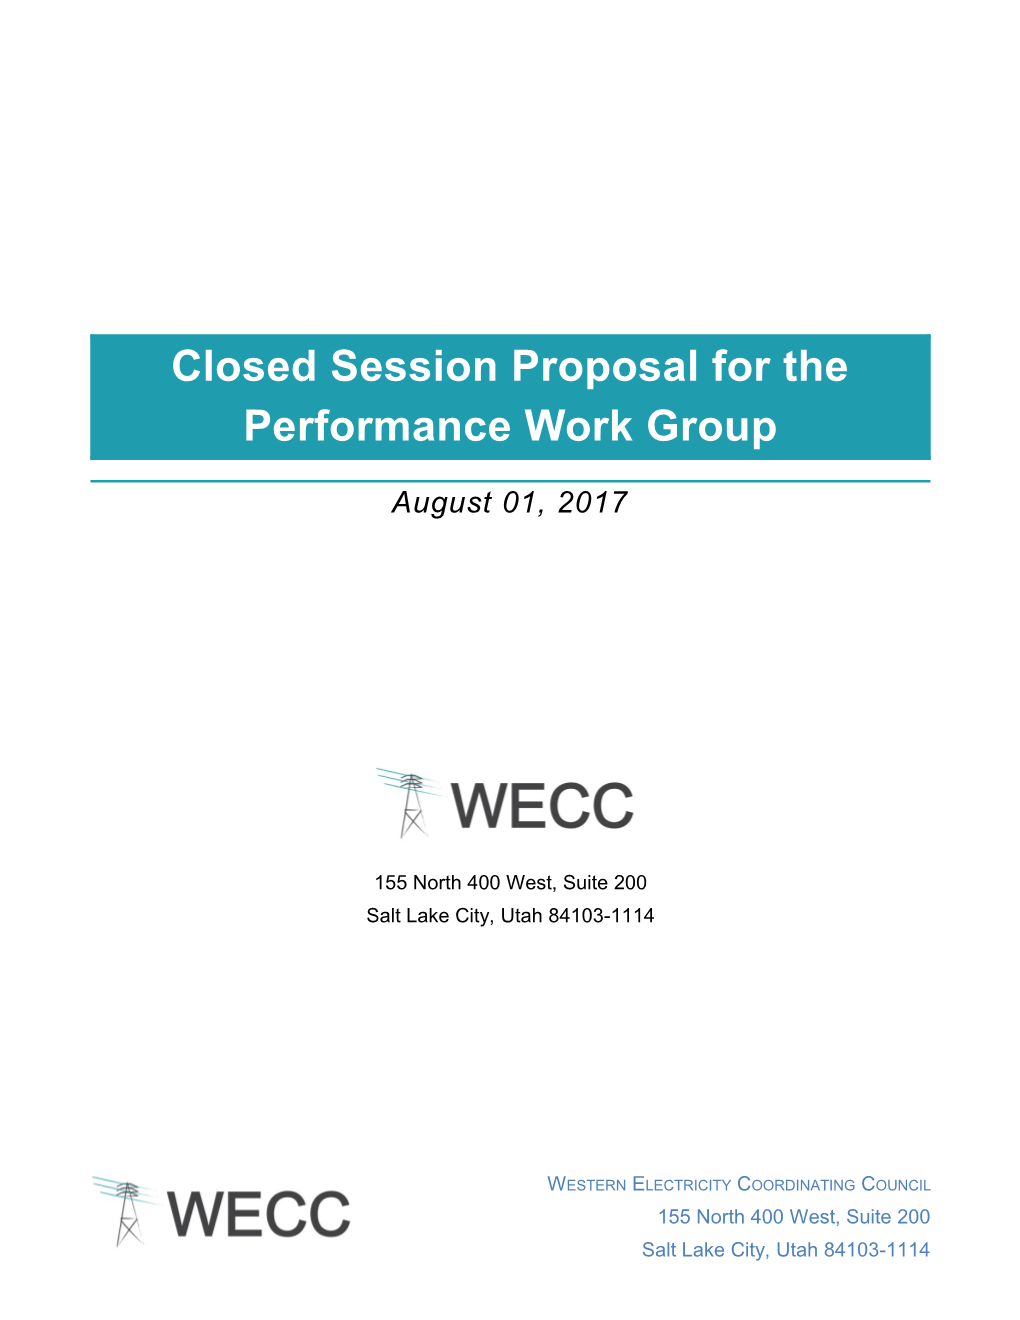 PWG Closed Session Proposal